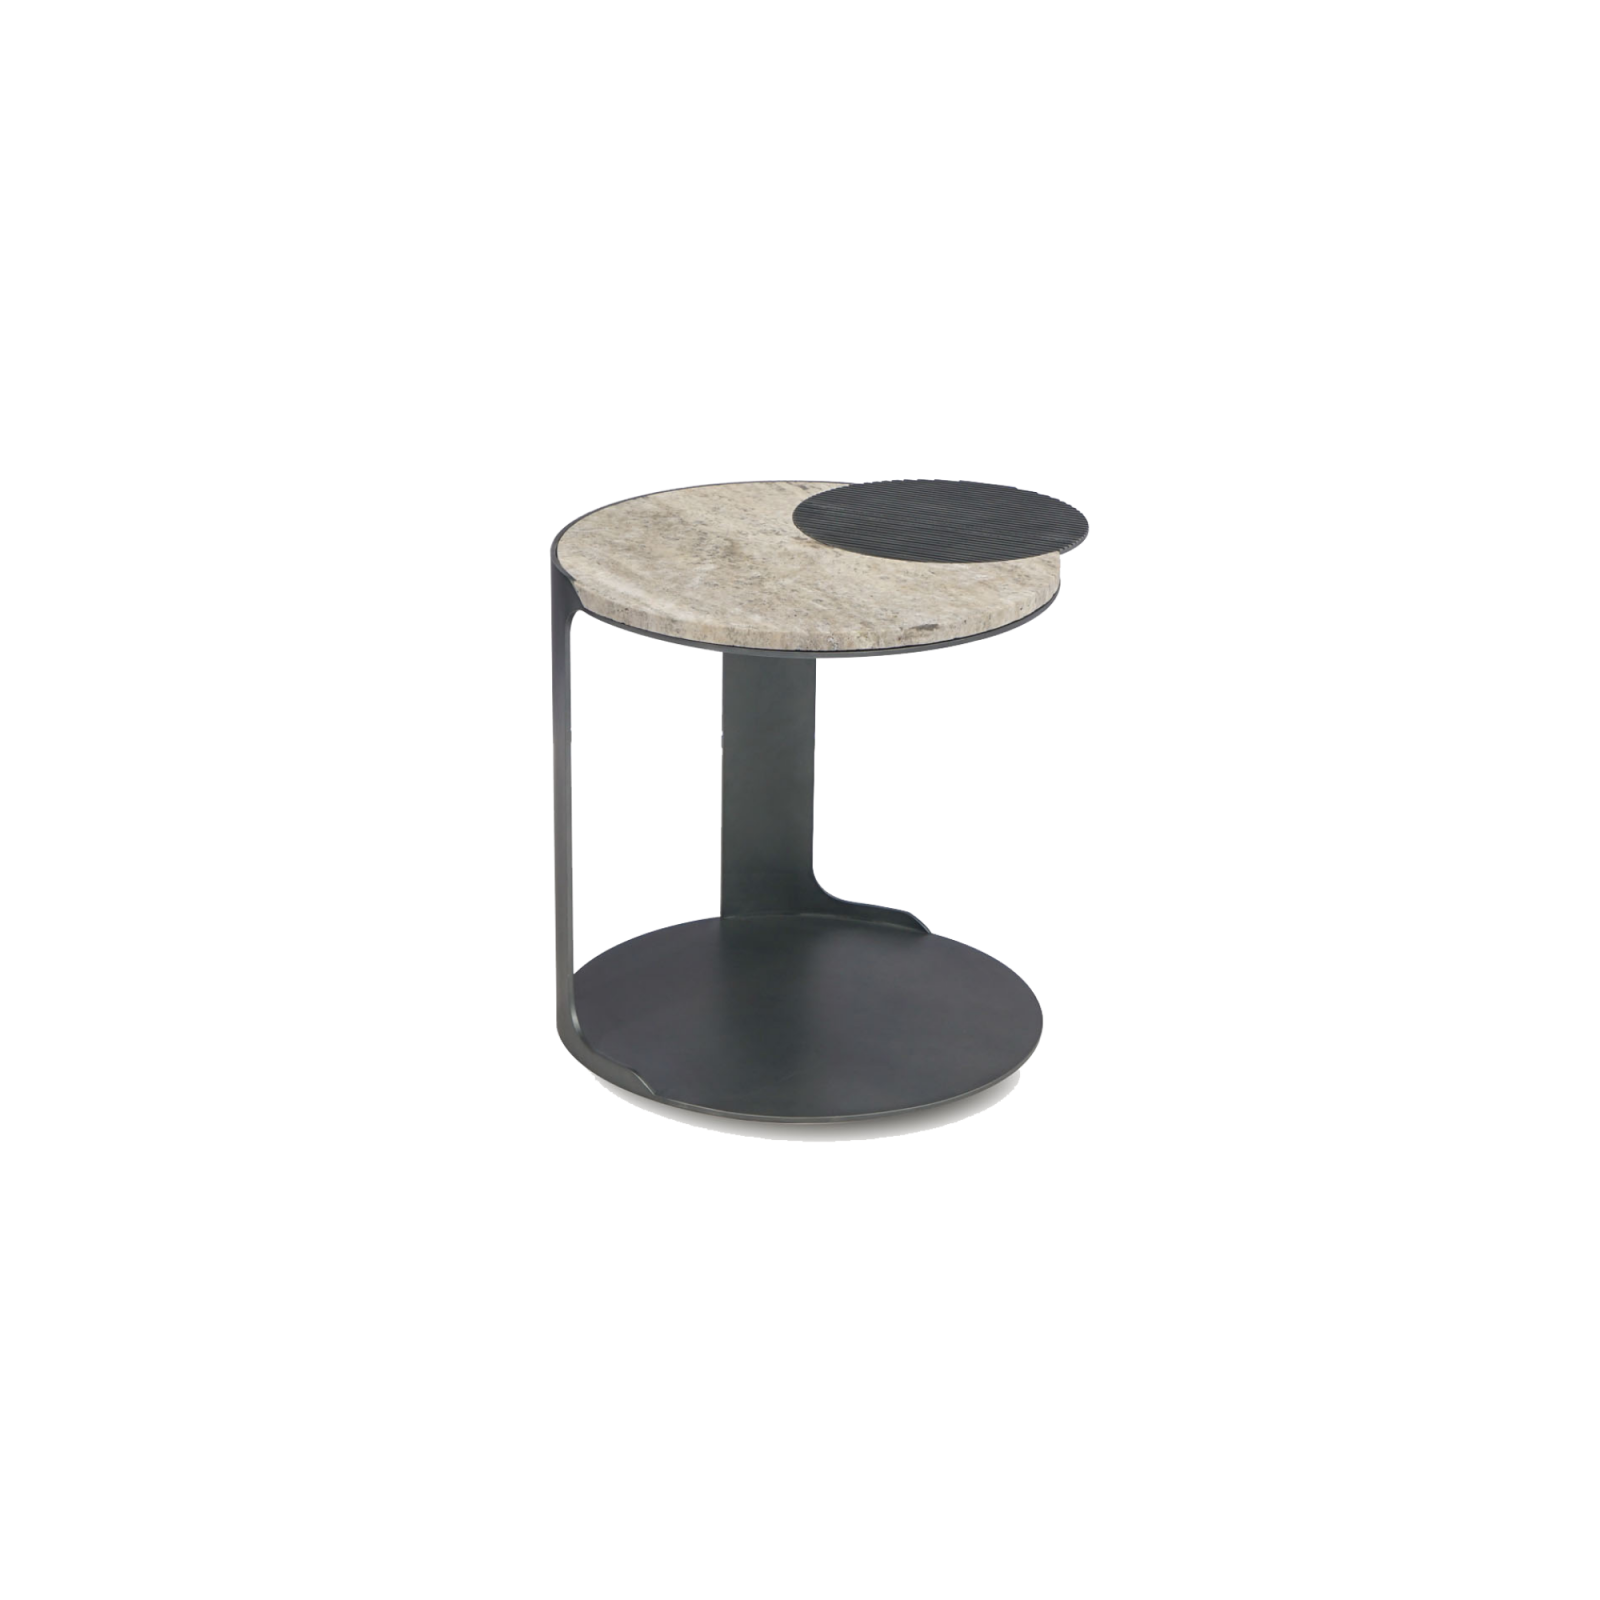 Round Ocean Side Table standing on a white wall